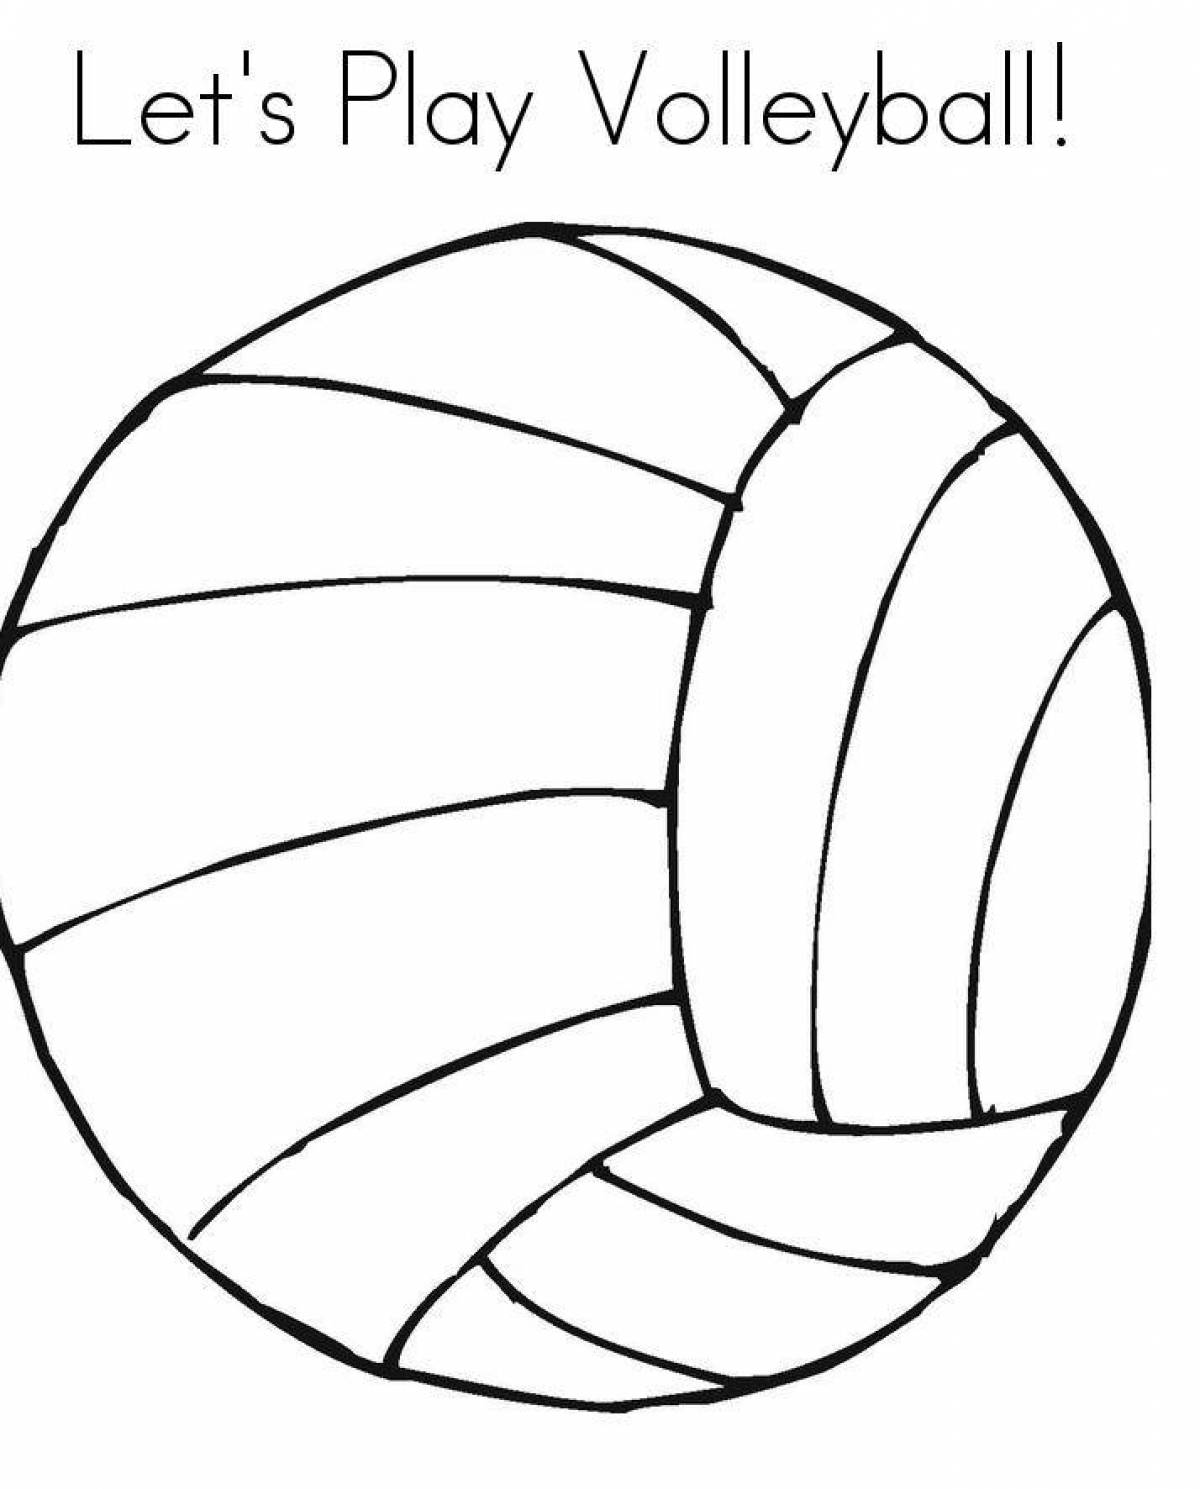 Volleyball coloring page bold